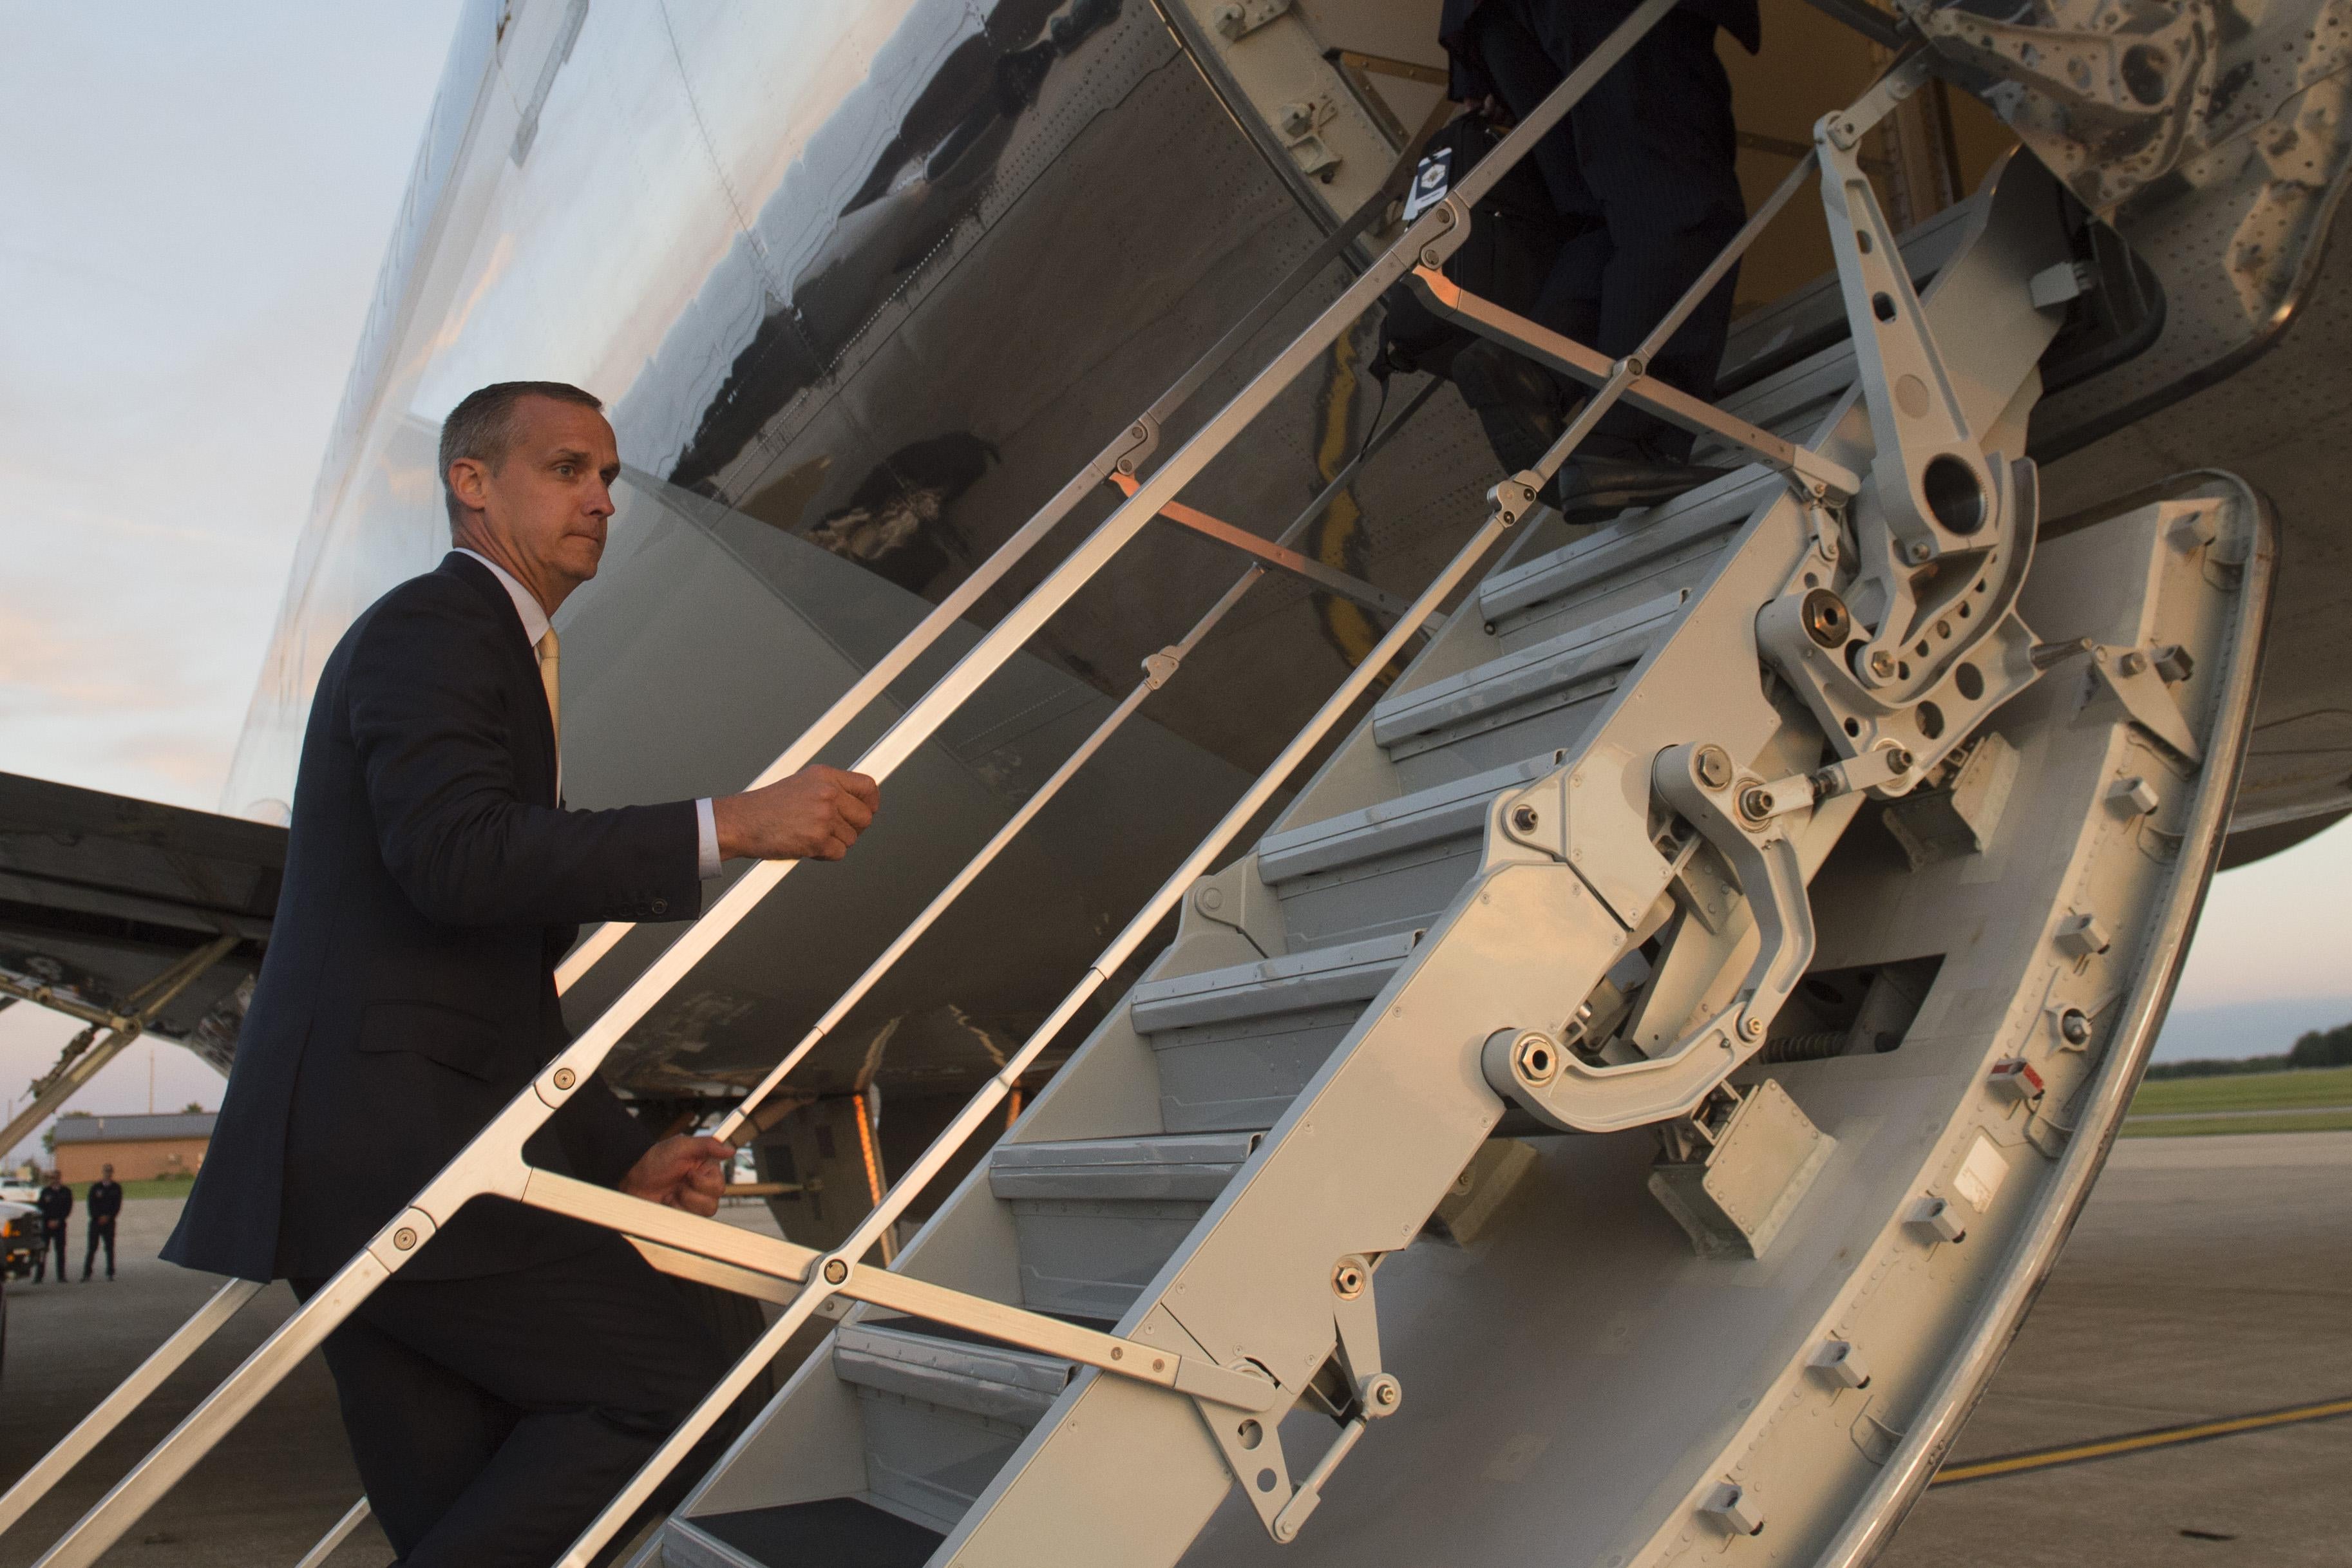 Former campaign aide Corey Lewandowski boards Air Force One prior to departure from Youngstown-Warren Regional Airport in Vienna, Ohio, July 25, 2017, following a campaign rally with US President Donald Trump. / AFP PHOTO / SAUL LOEB        (Photo credit should read SAUL LOEB/AFP/Getty Images)